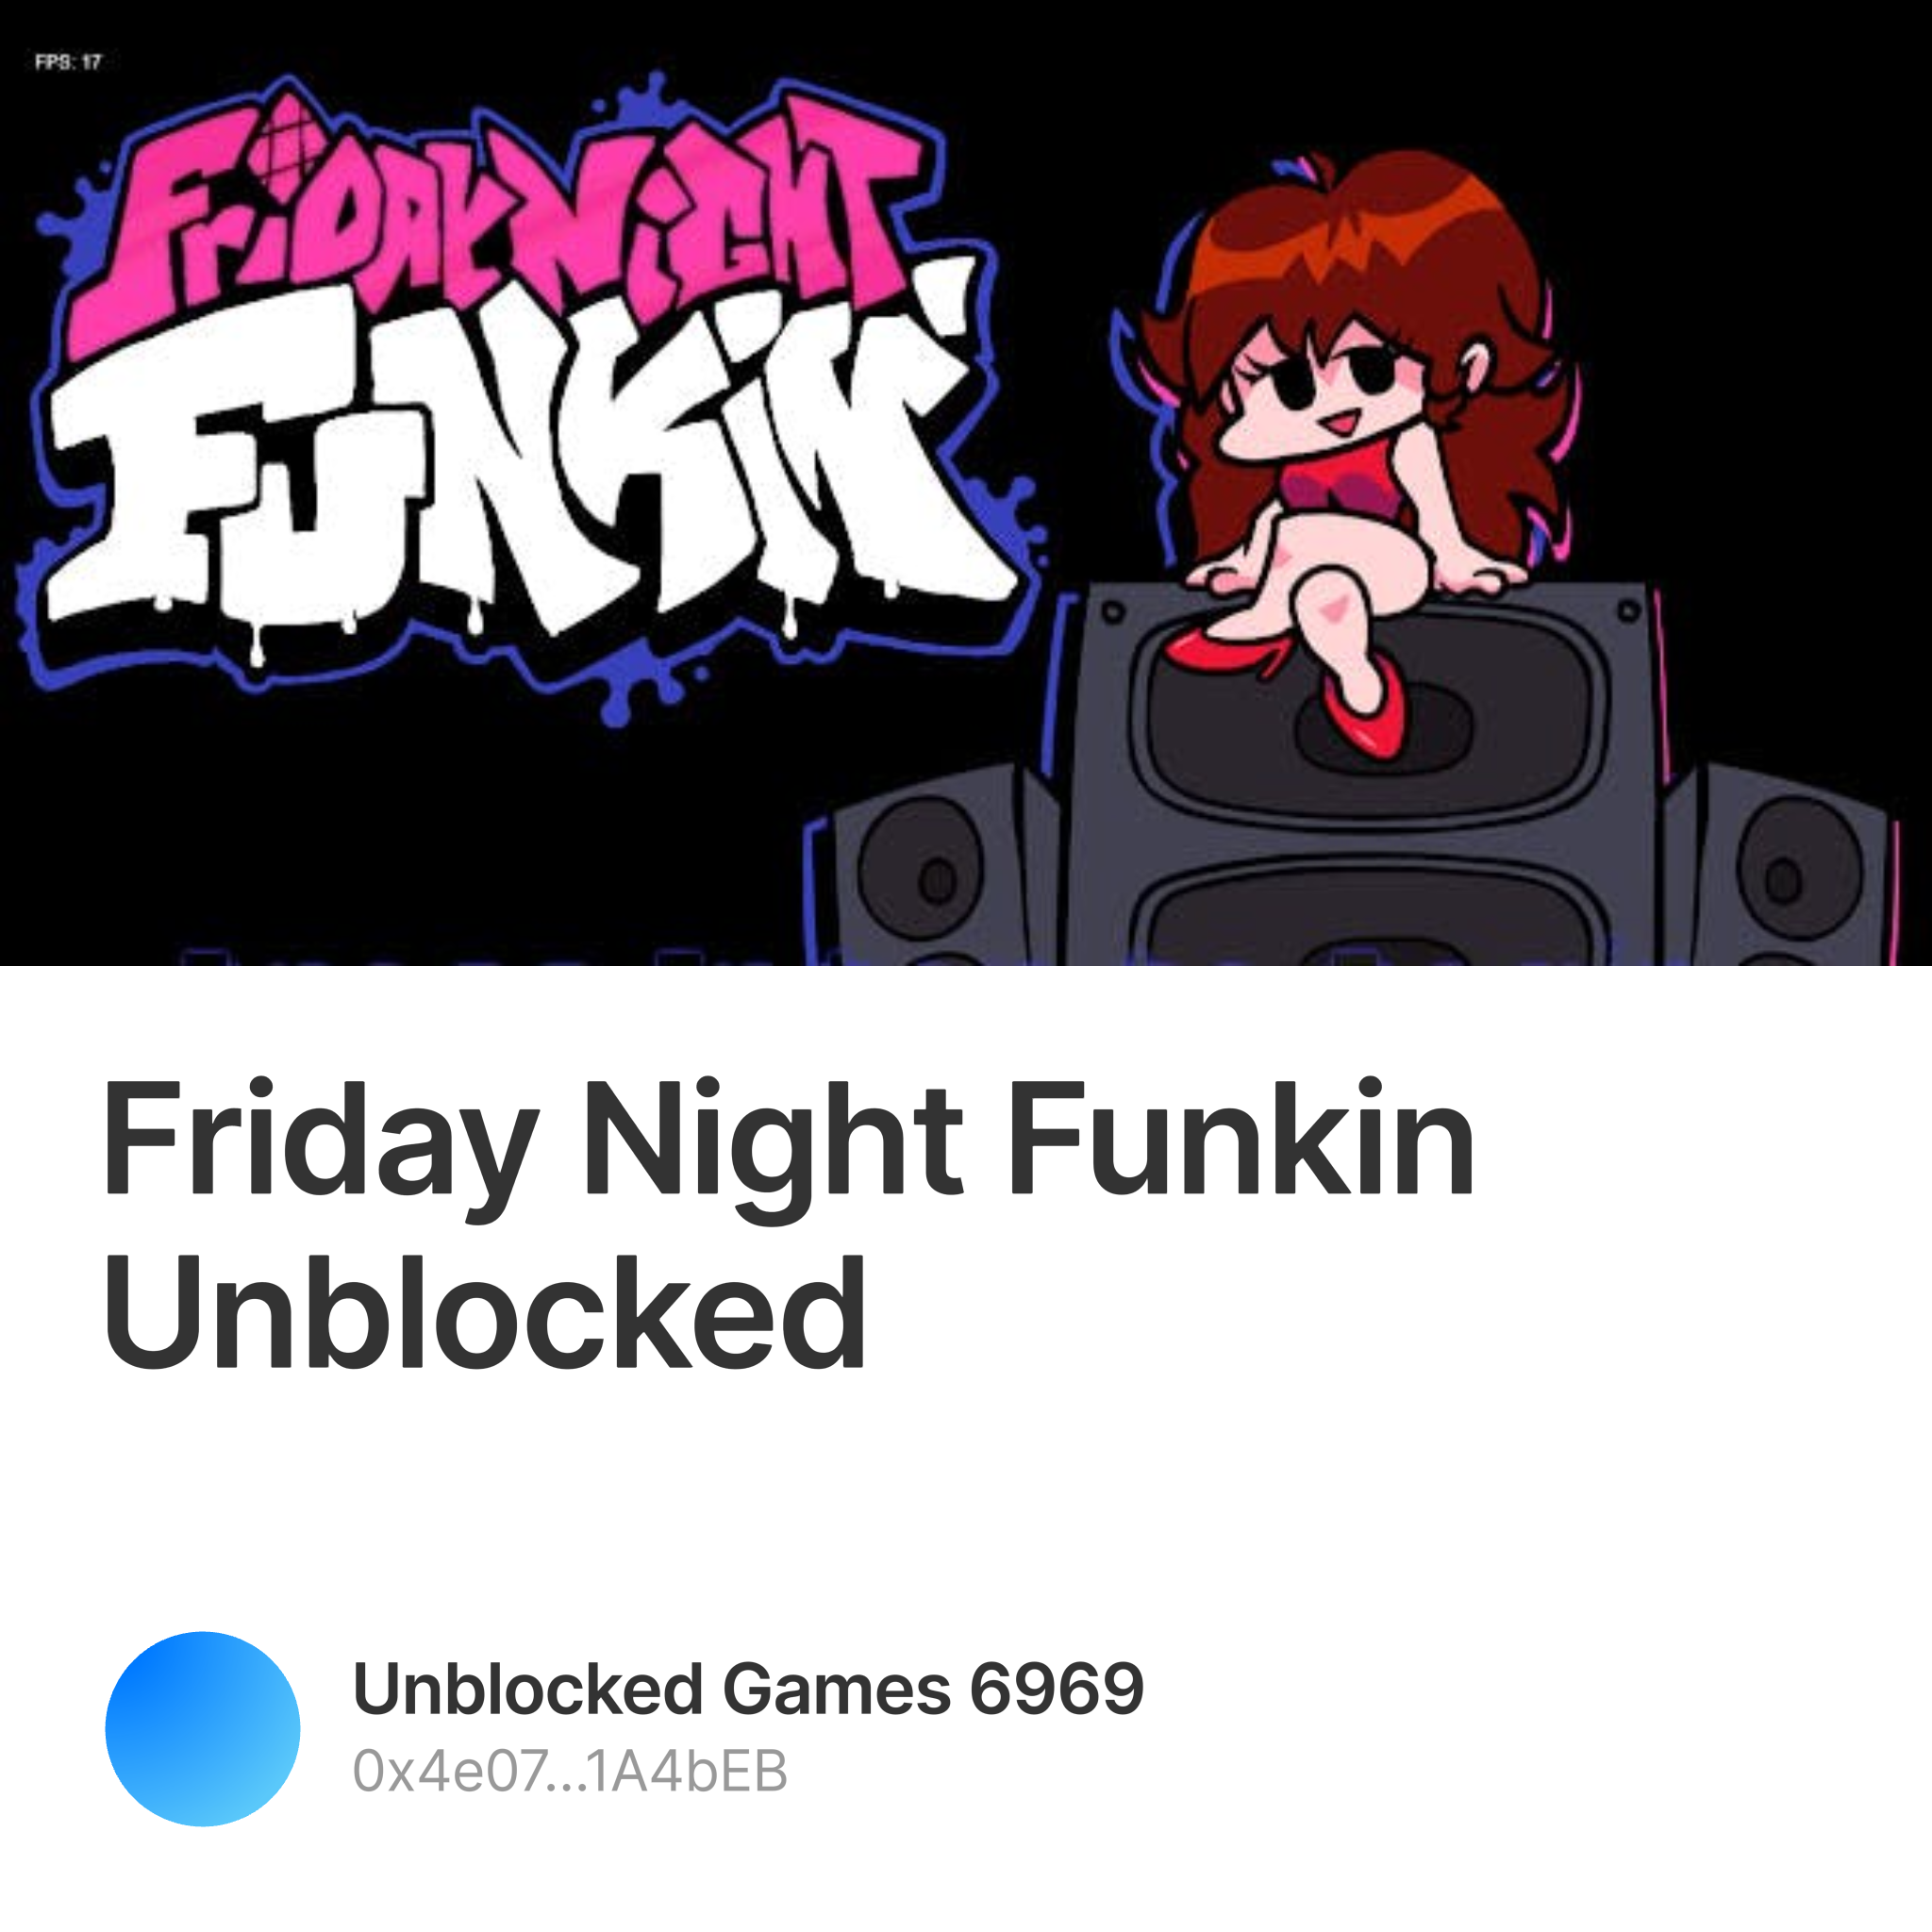 FNF unblocked game - Friday Night Funkin unblocked play online